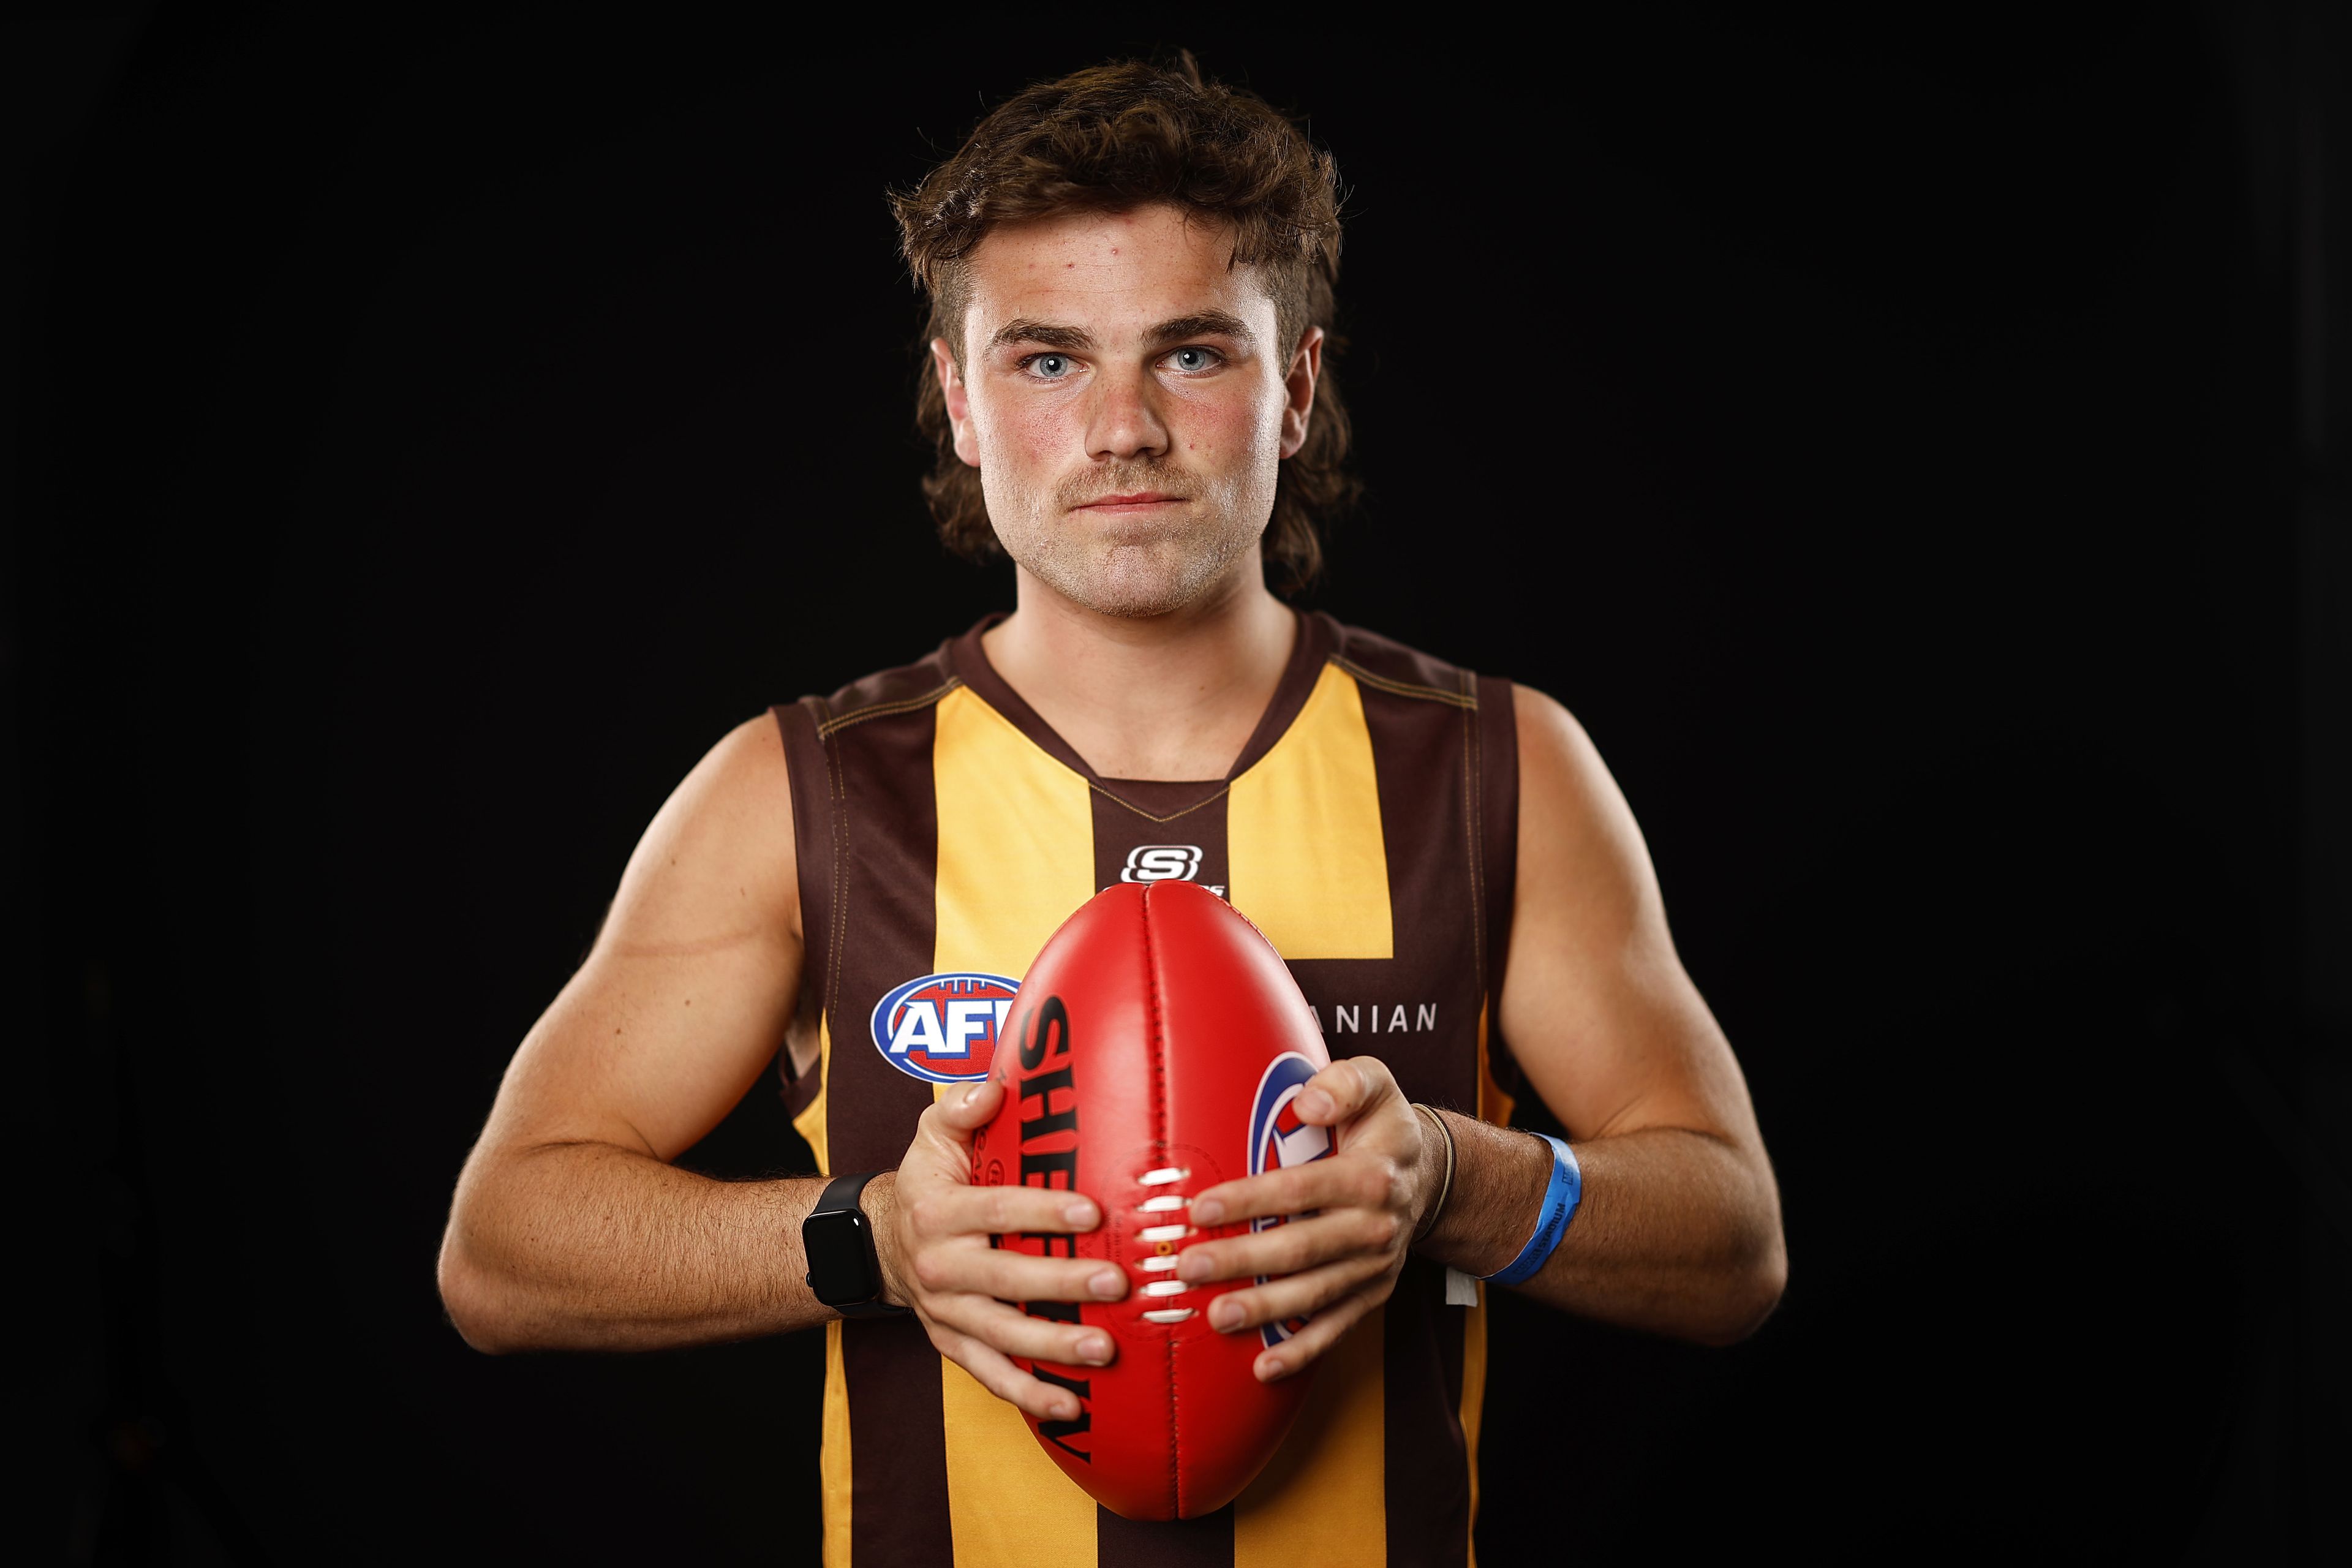 'It's the role I play': Hawthorn draftee Nick Watson ready to rile up opponents alongside Jack Ginnivan